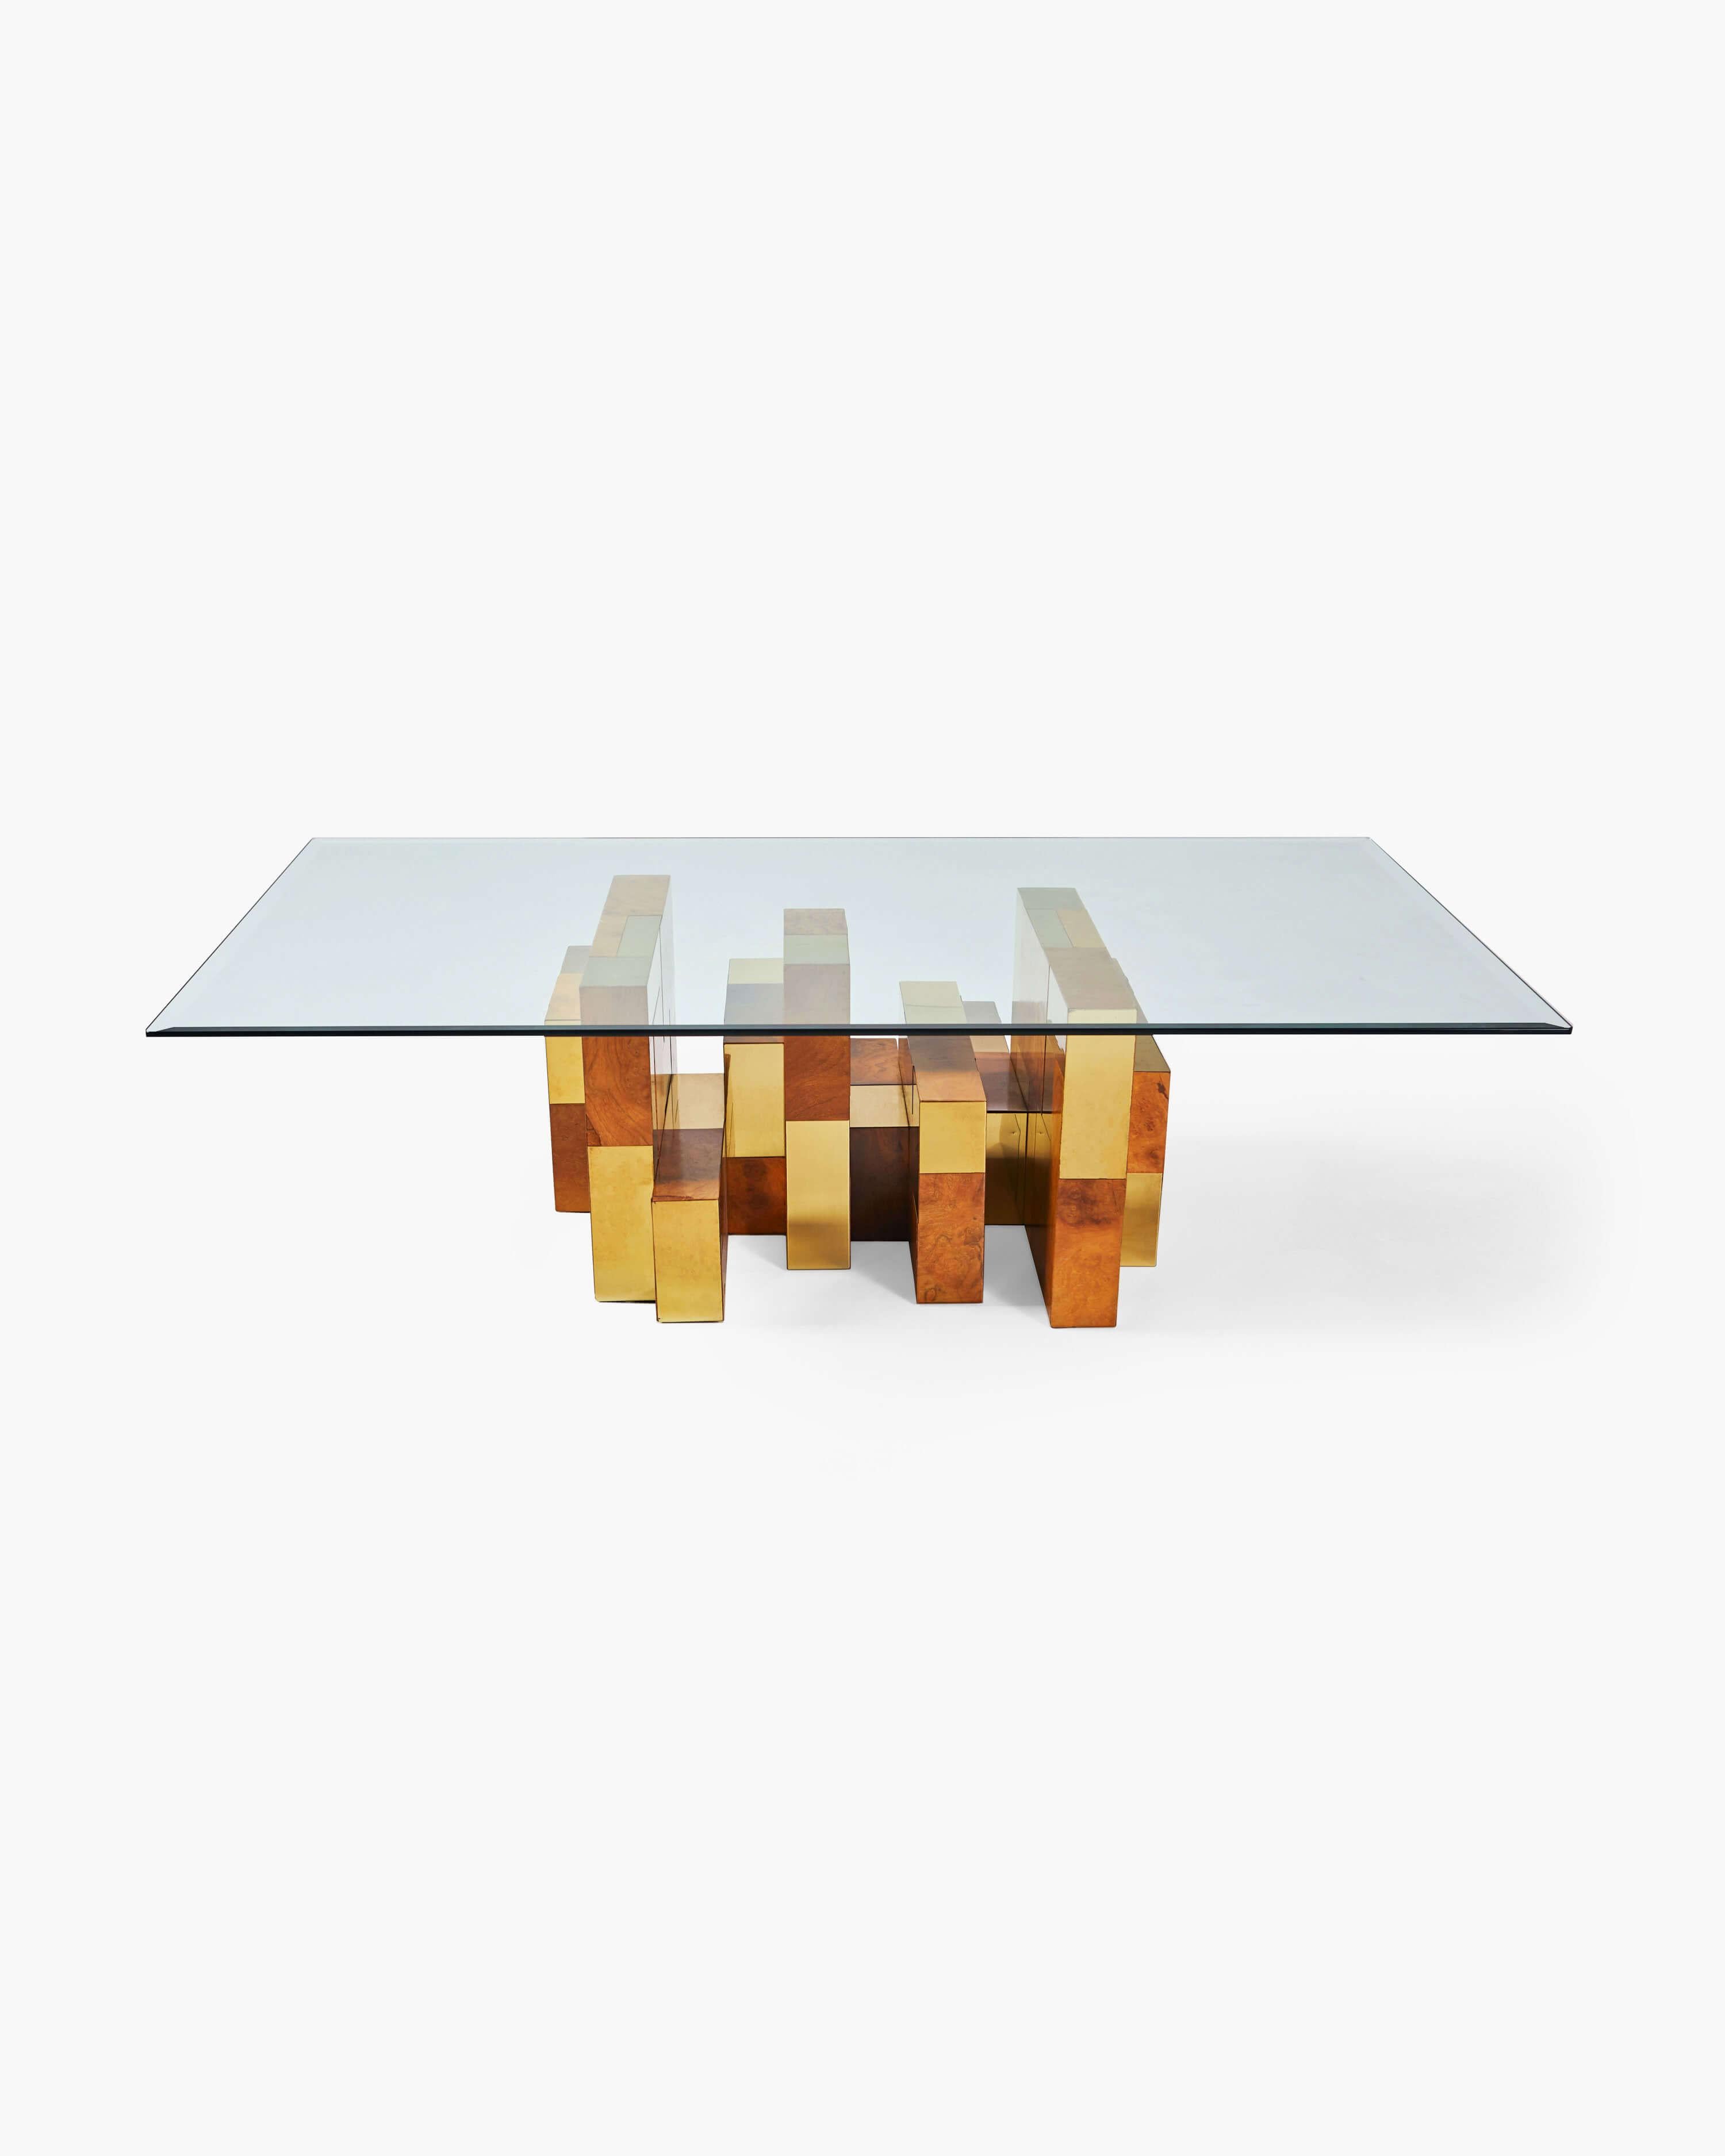 A sheet of tinted glass sits atop a base of burl-wood and brass intersecting polyominoes in this object of sculptural mastery. The piece highlights Evans' attunement to both form and function. As the name suggests, this interplay of reflective and